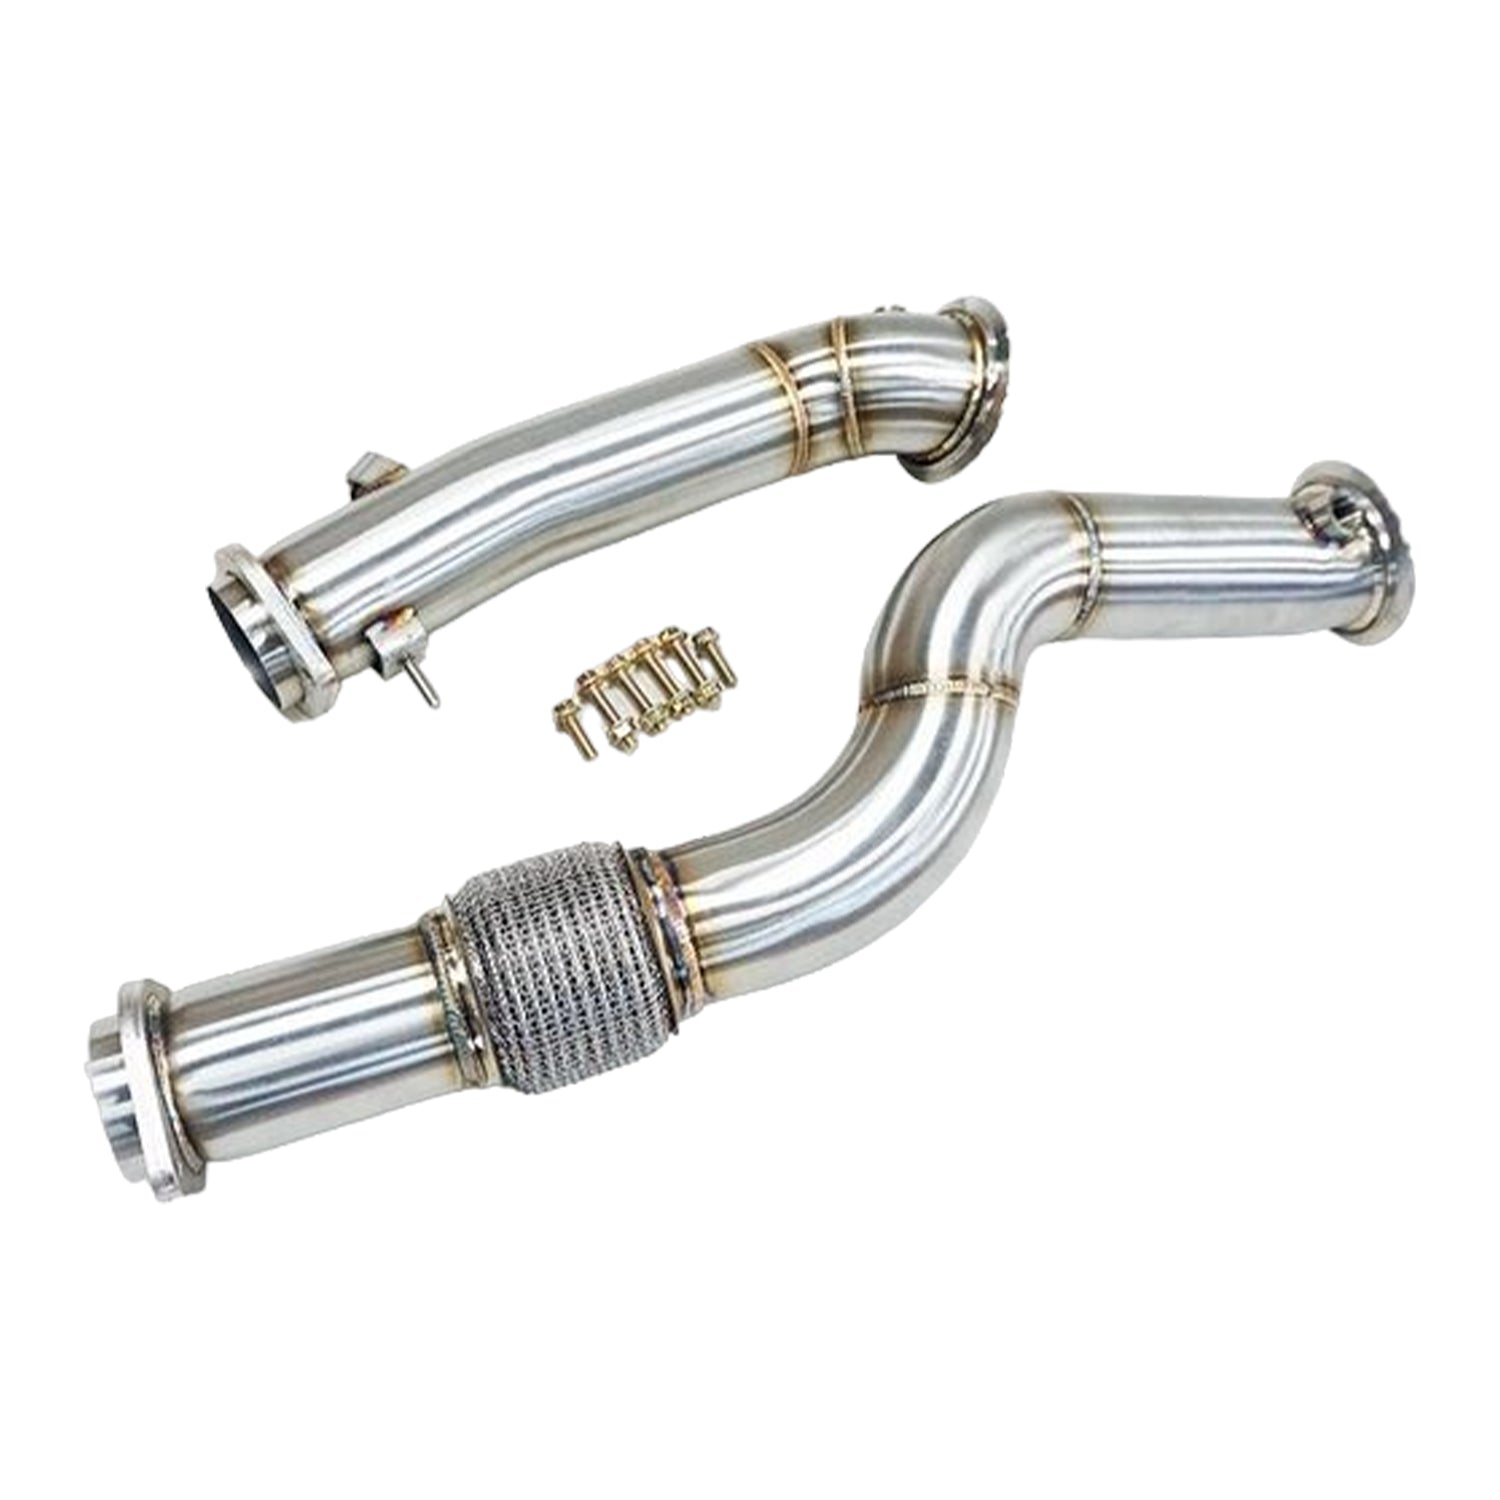 BMW S58 Decat Downpipes - G80 G81 M3, G82 G83 M4 & G87 M2